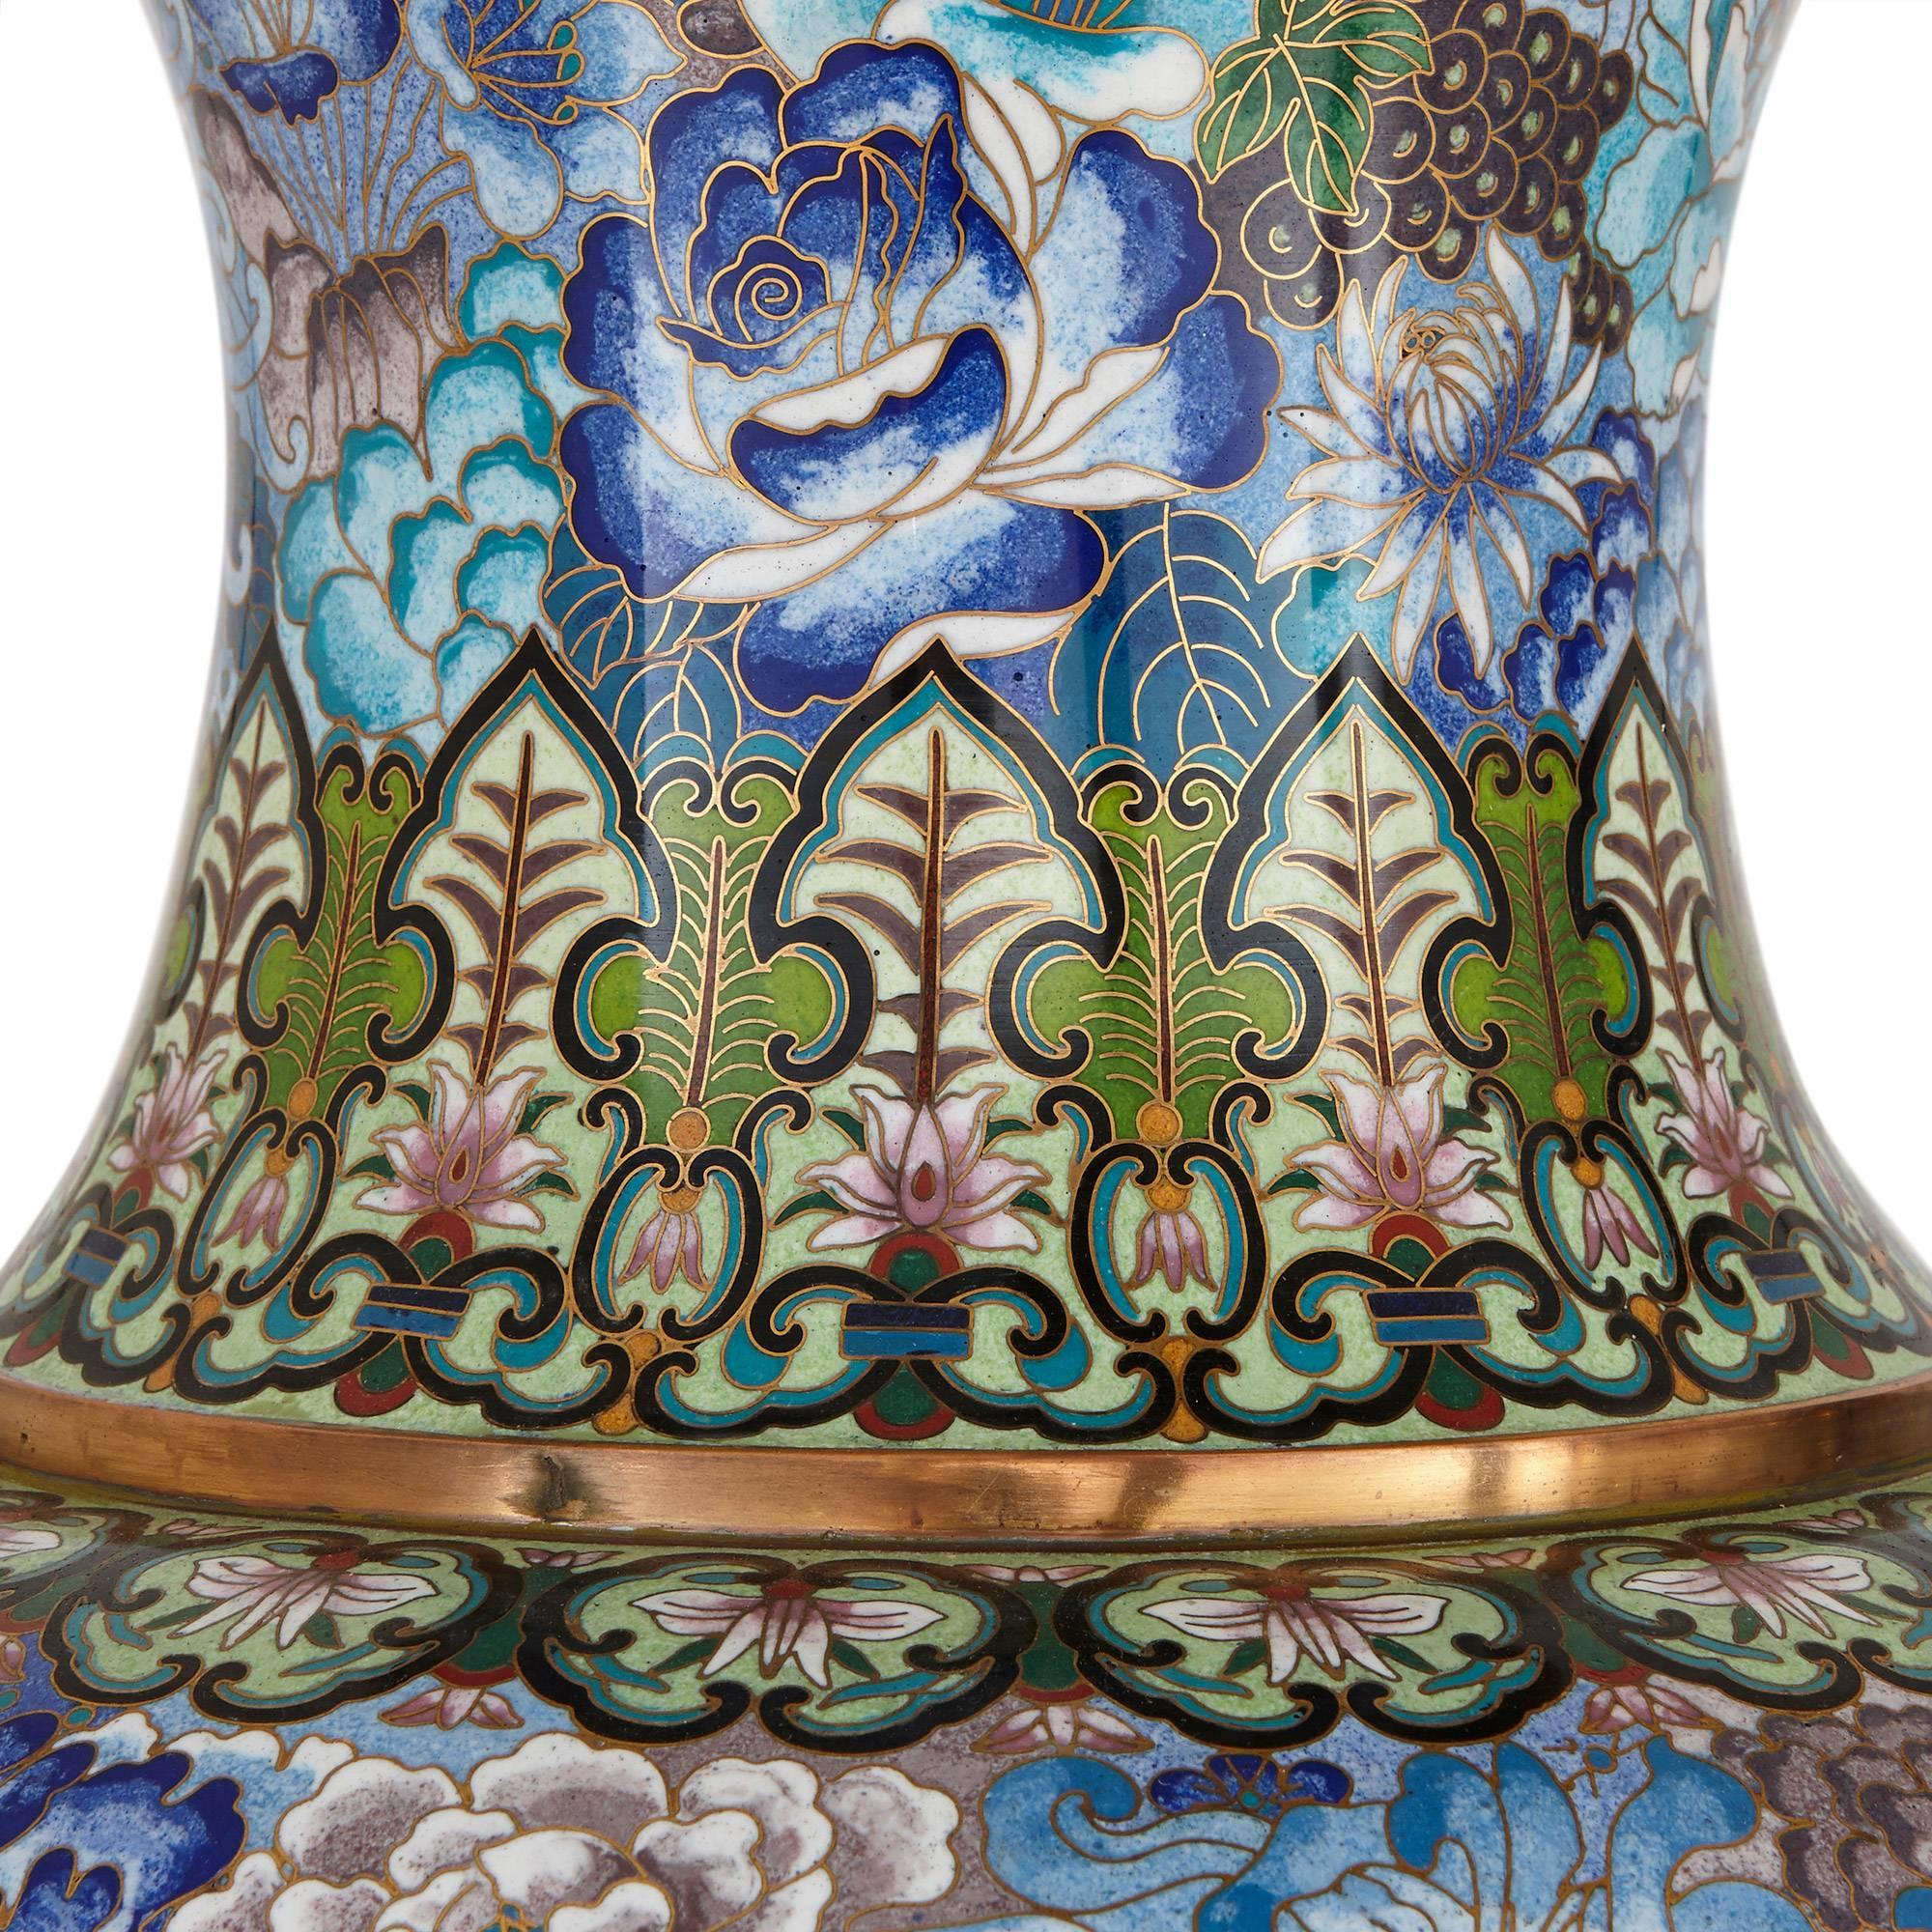 Each extensively decorated with a pattern of floral design in tonal blue colours with green and cream band decorations, and complete with wooden stands

These magnificent vases are richly decorated to an exceptionally high standard, embodying the